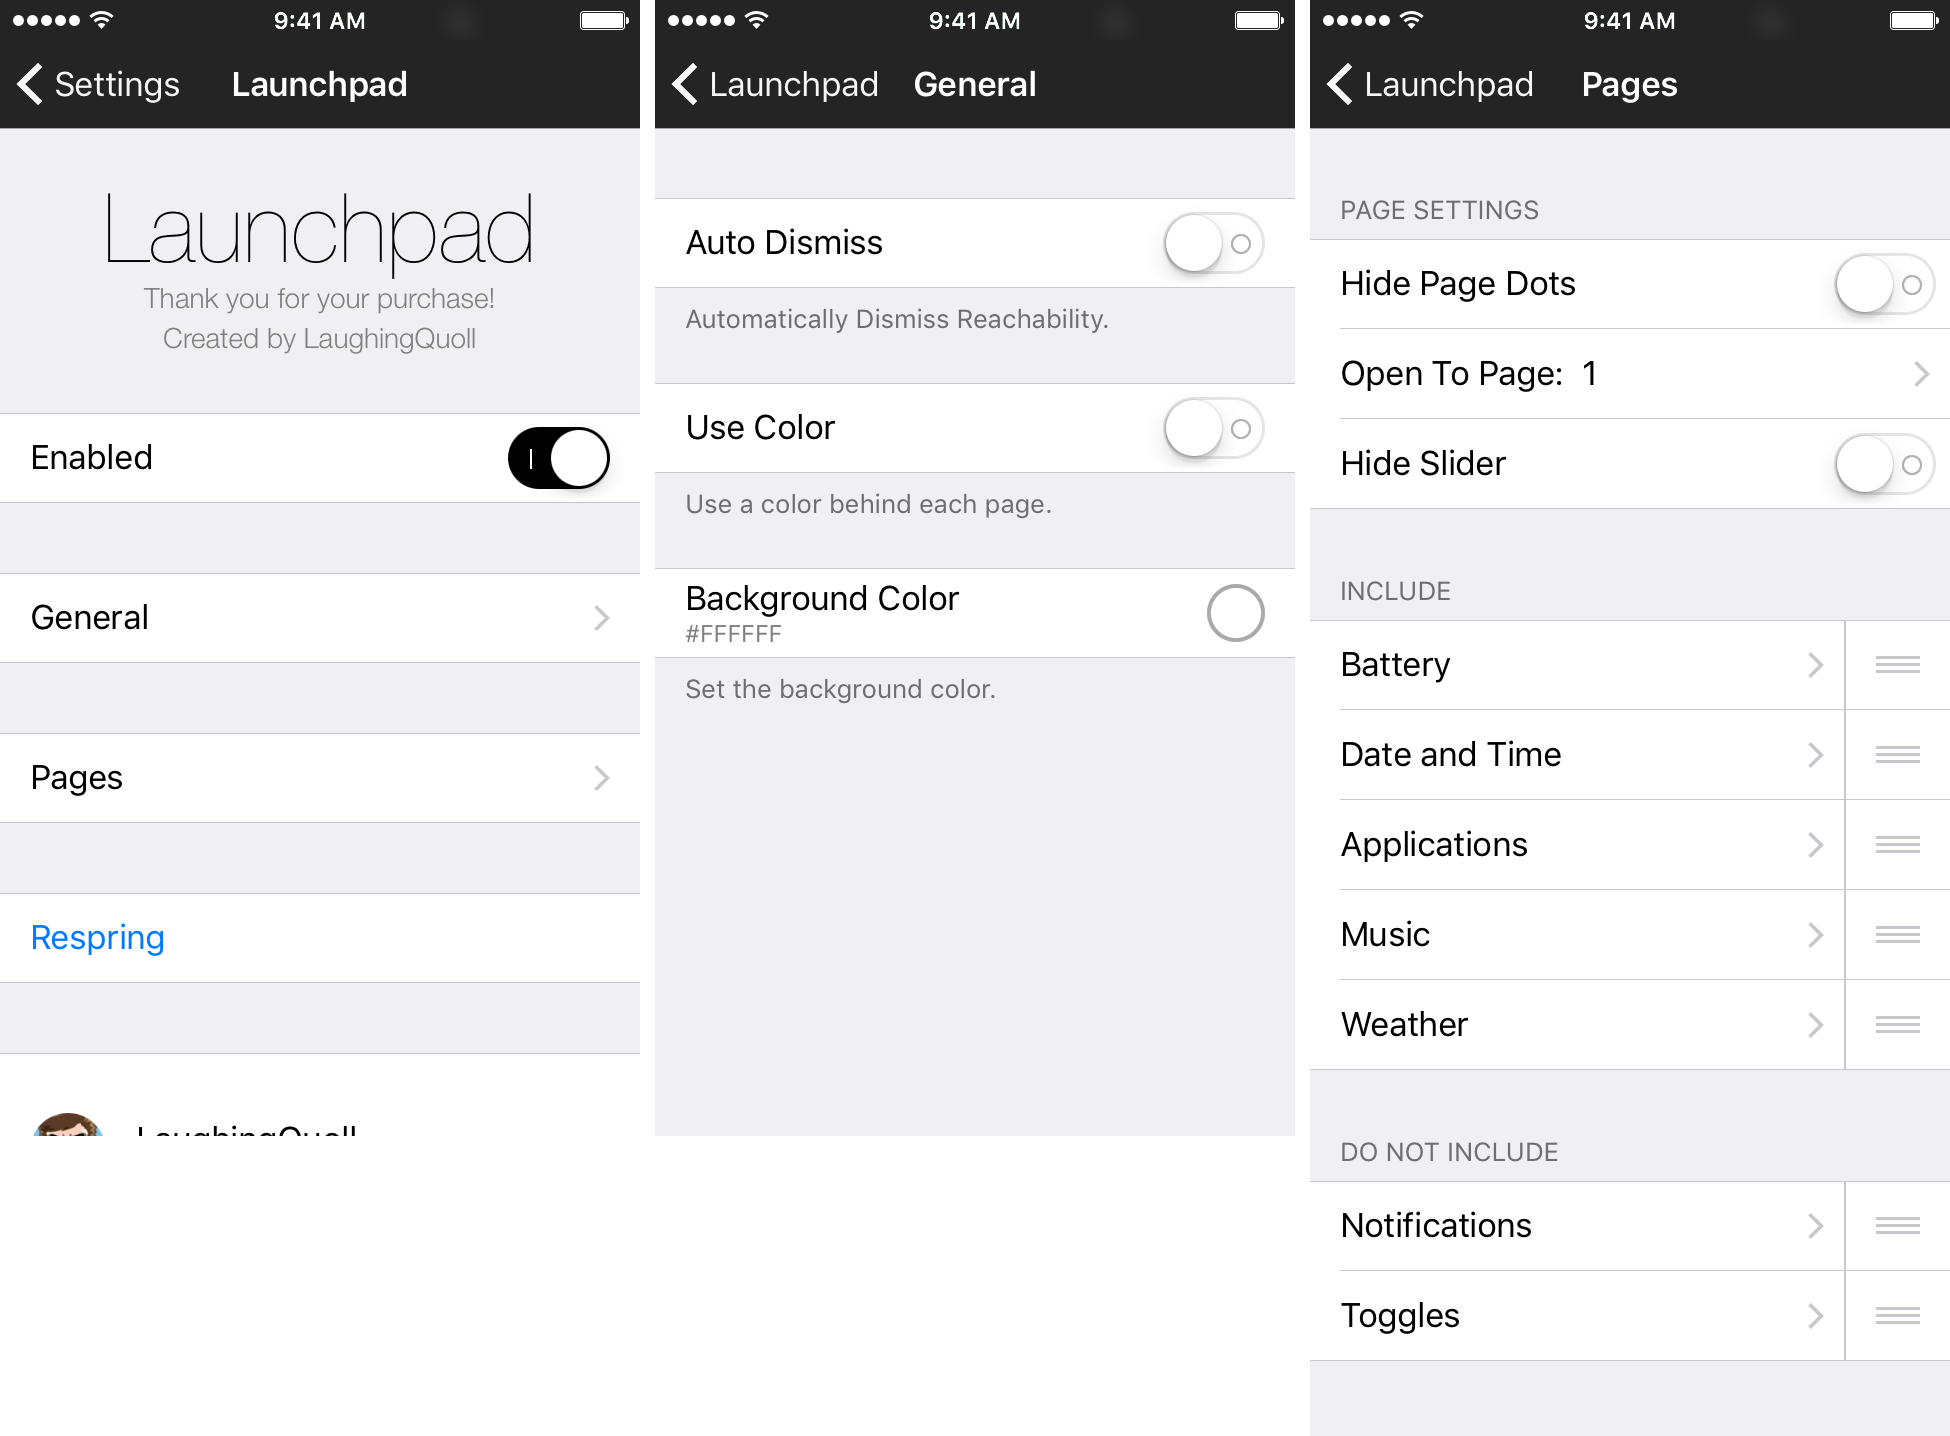 launchpad-preference-pane-options-to-configure